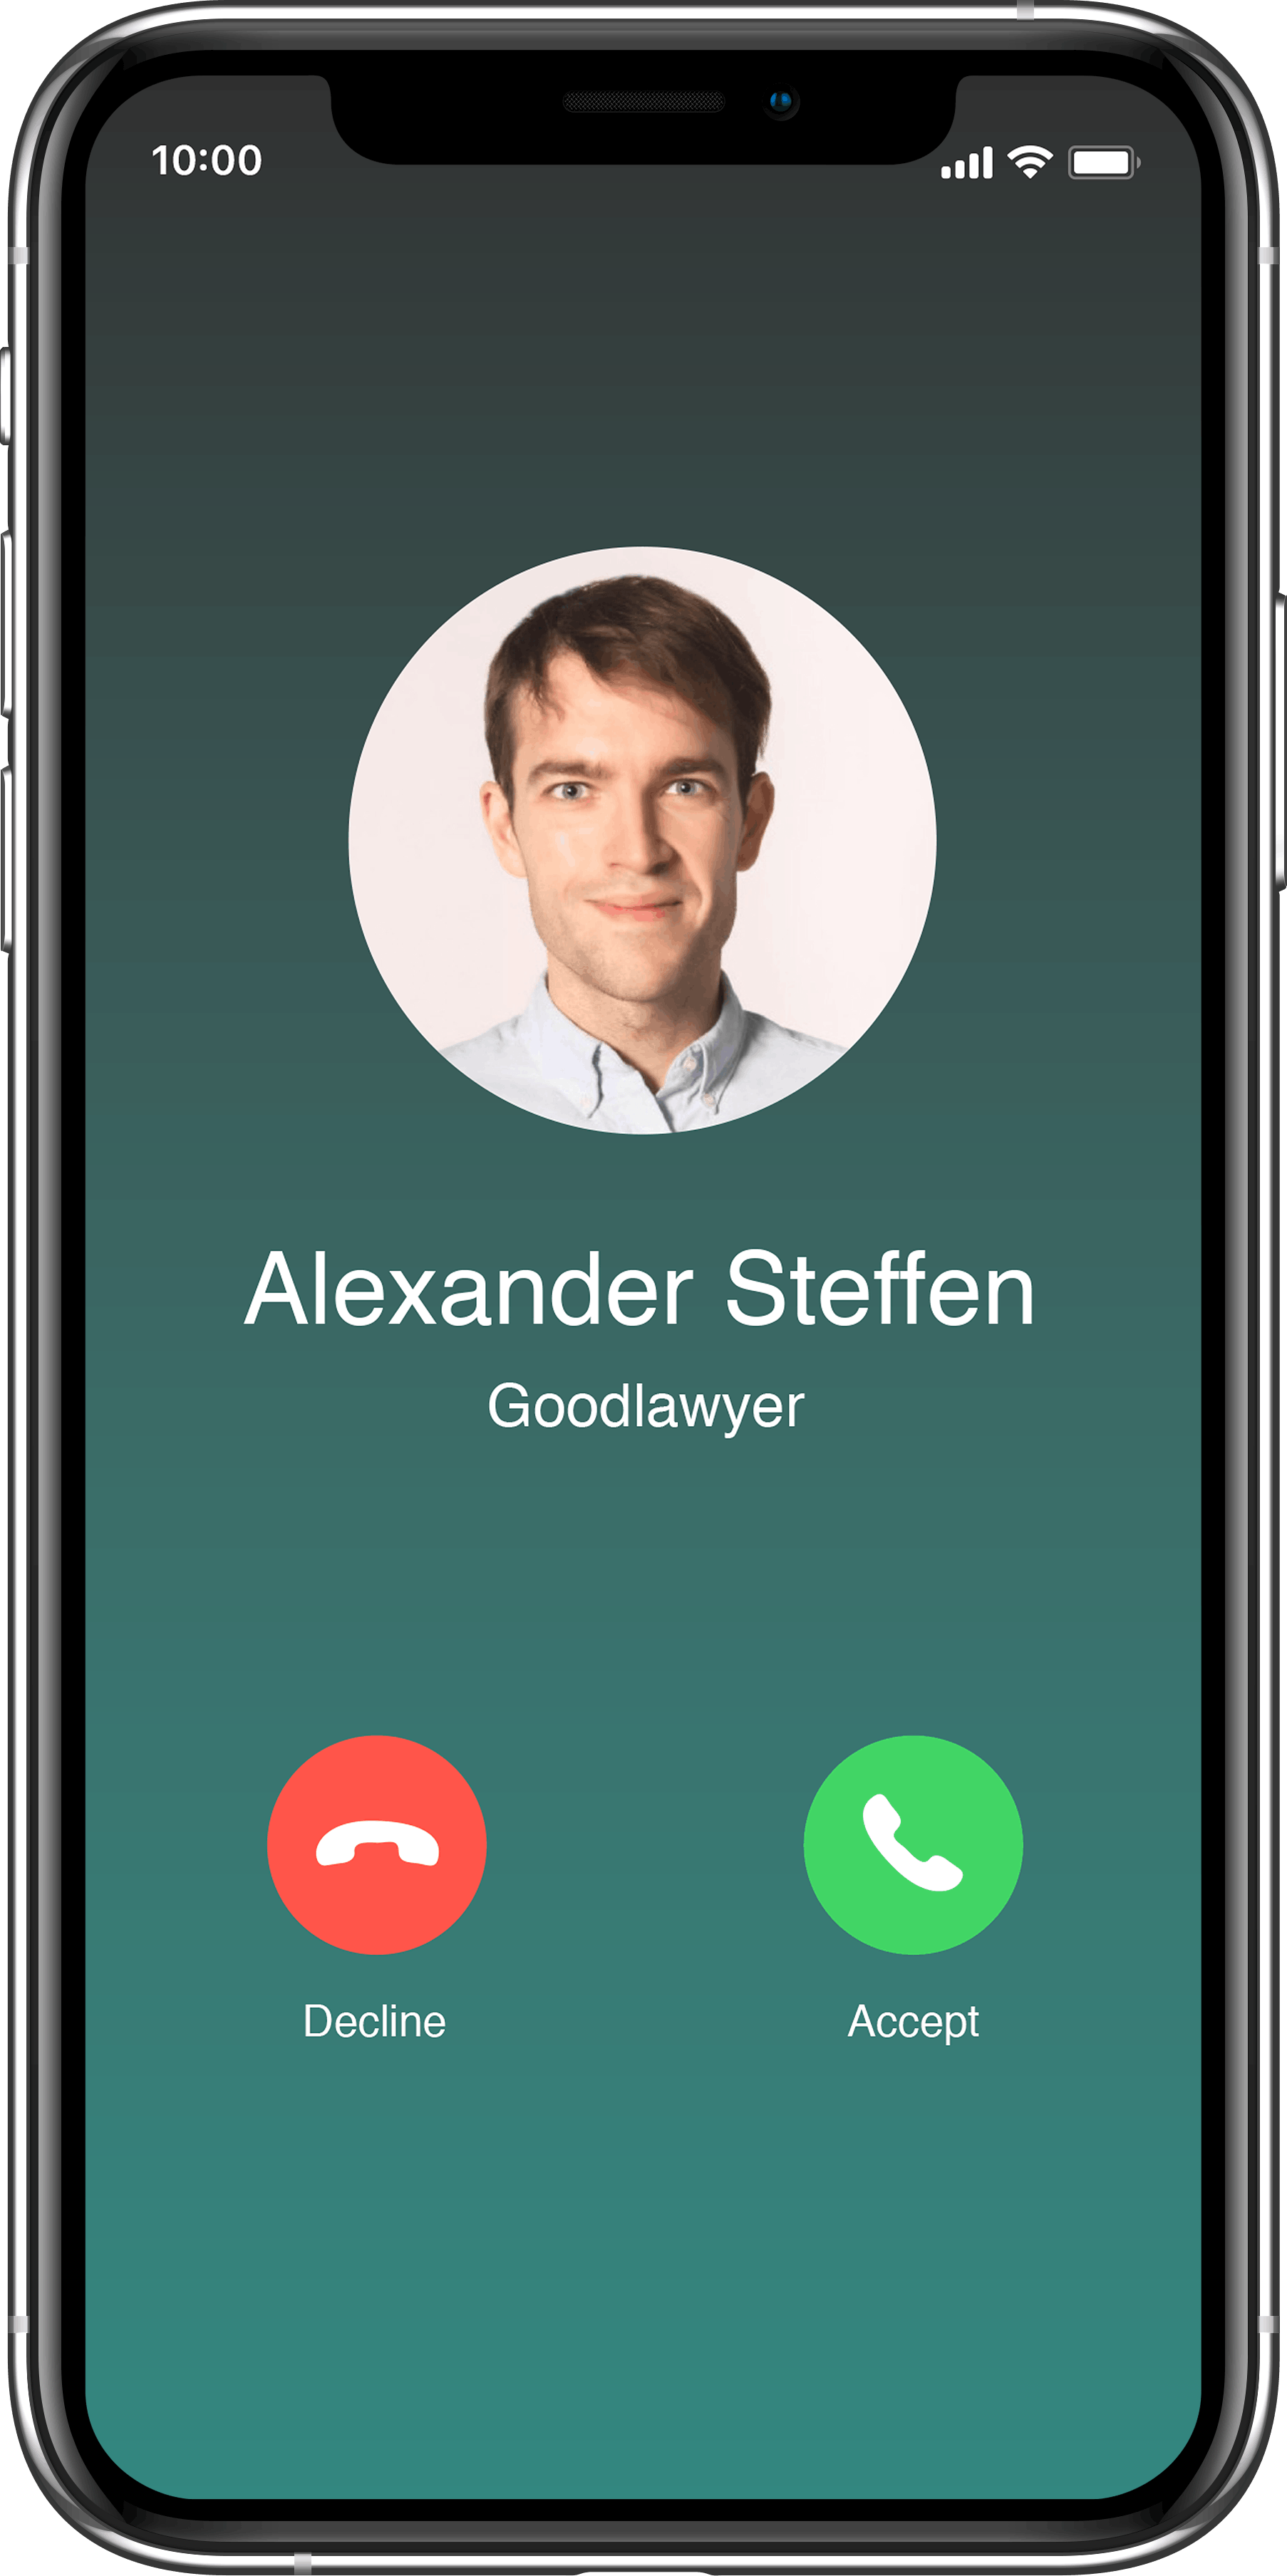 Connect with your trademark lawyer over the phone